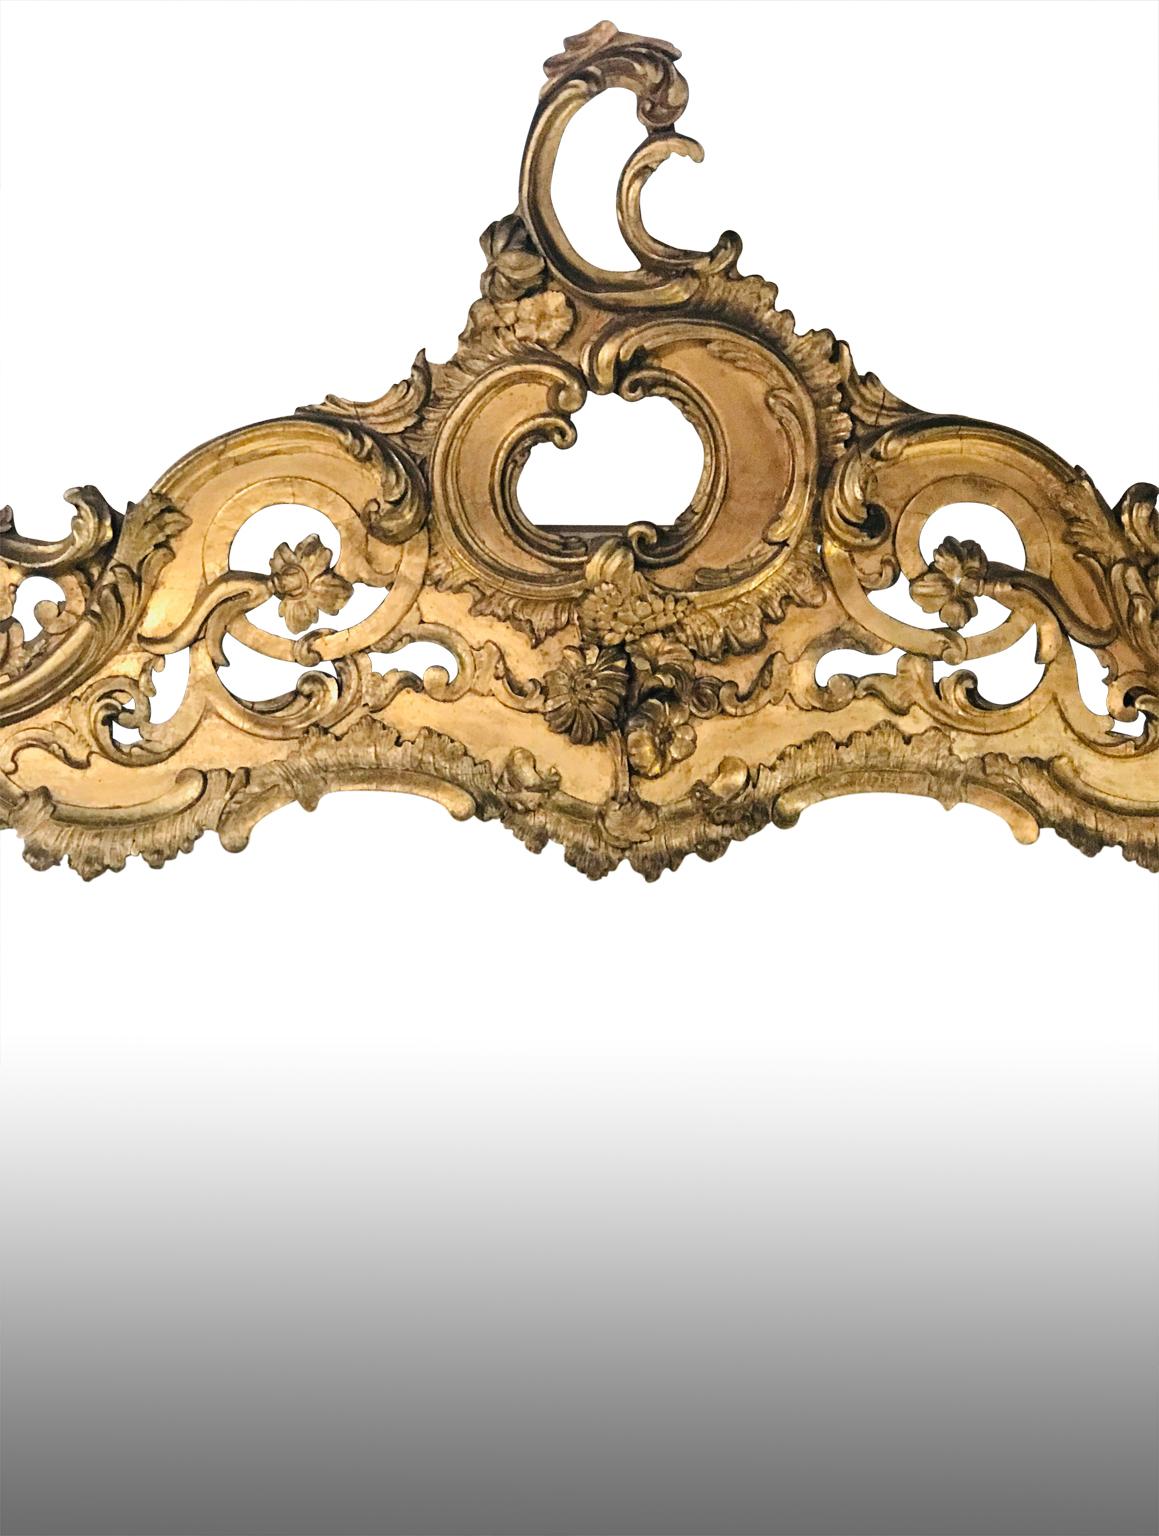 Large Italian 19th century gilt mirror with Rococo style carvings and decor.